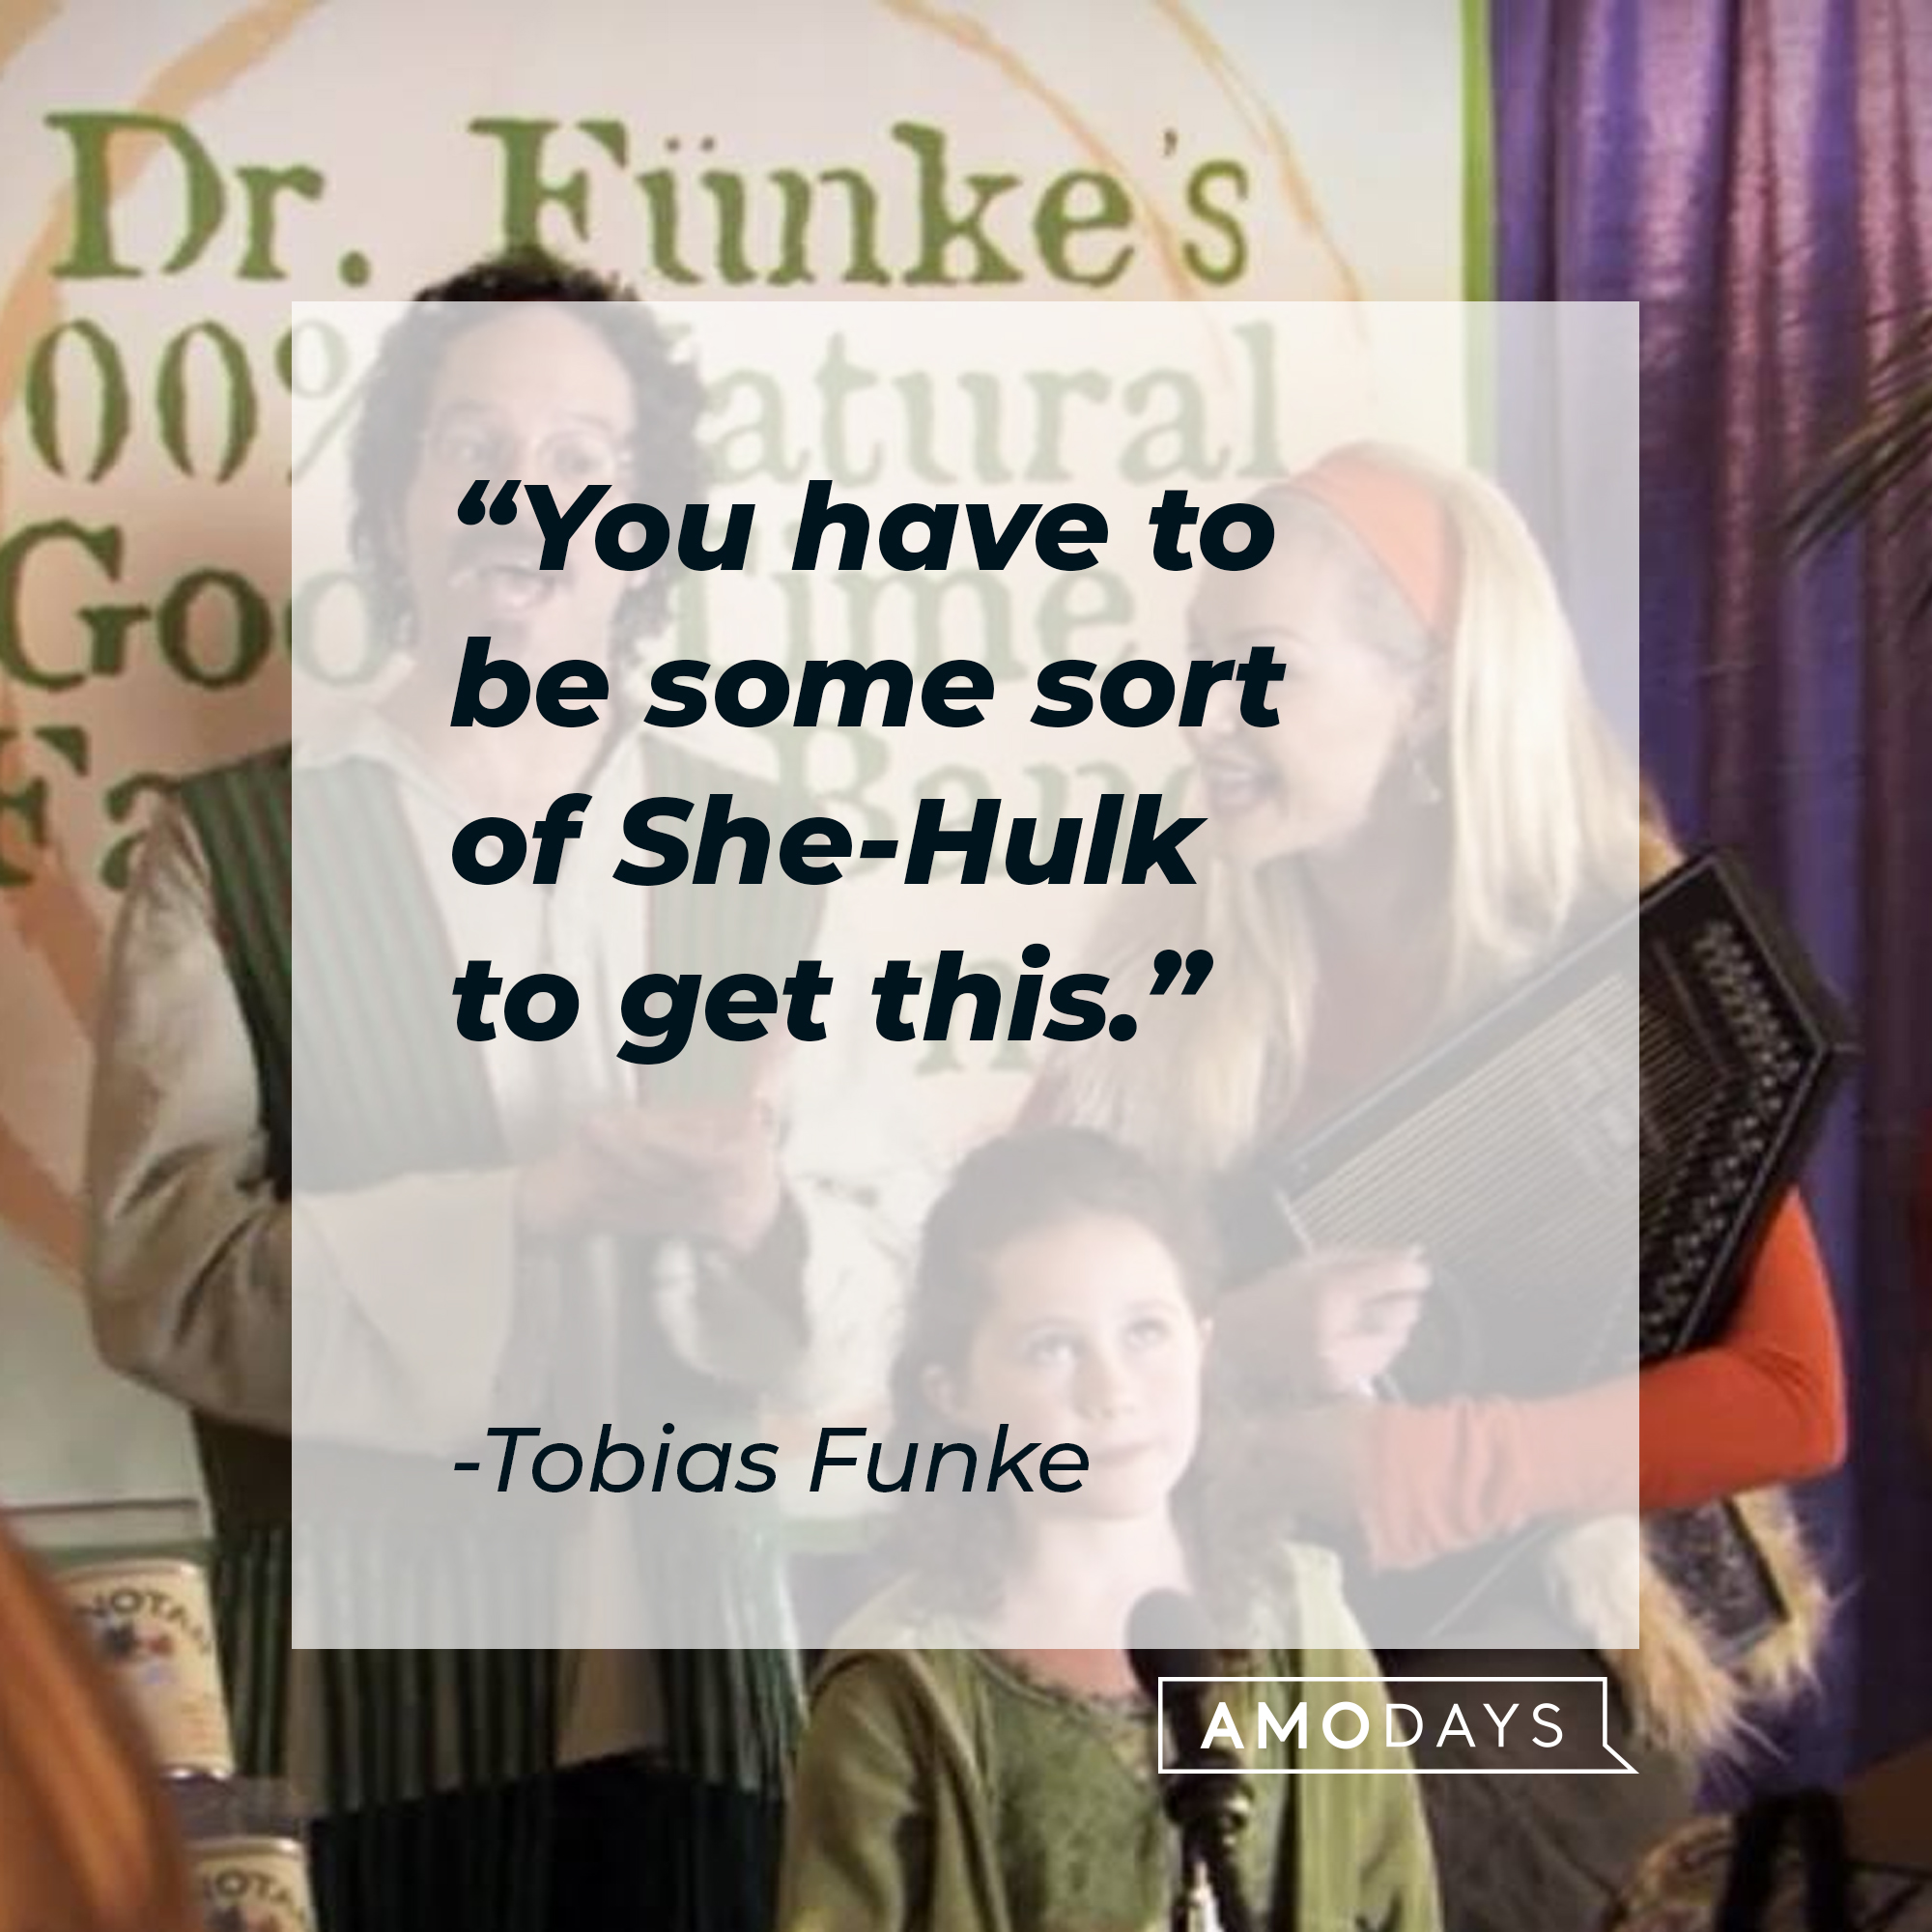 Tobias Funke's quote: "You have to be some sort of She-Hulk to get this." | Source: Facebook.com/ArrestedDevelopment